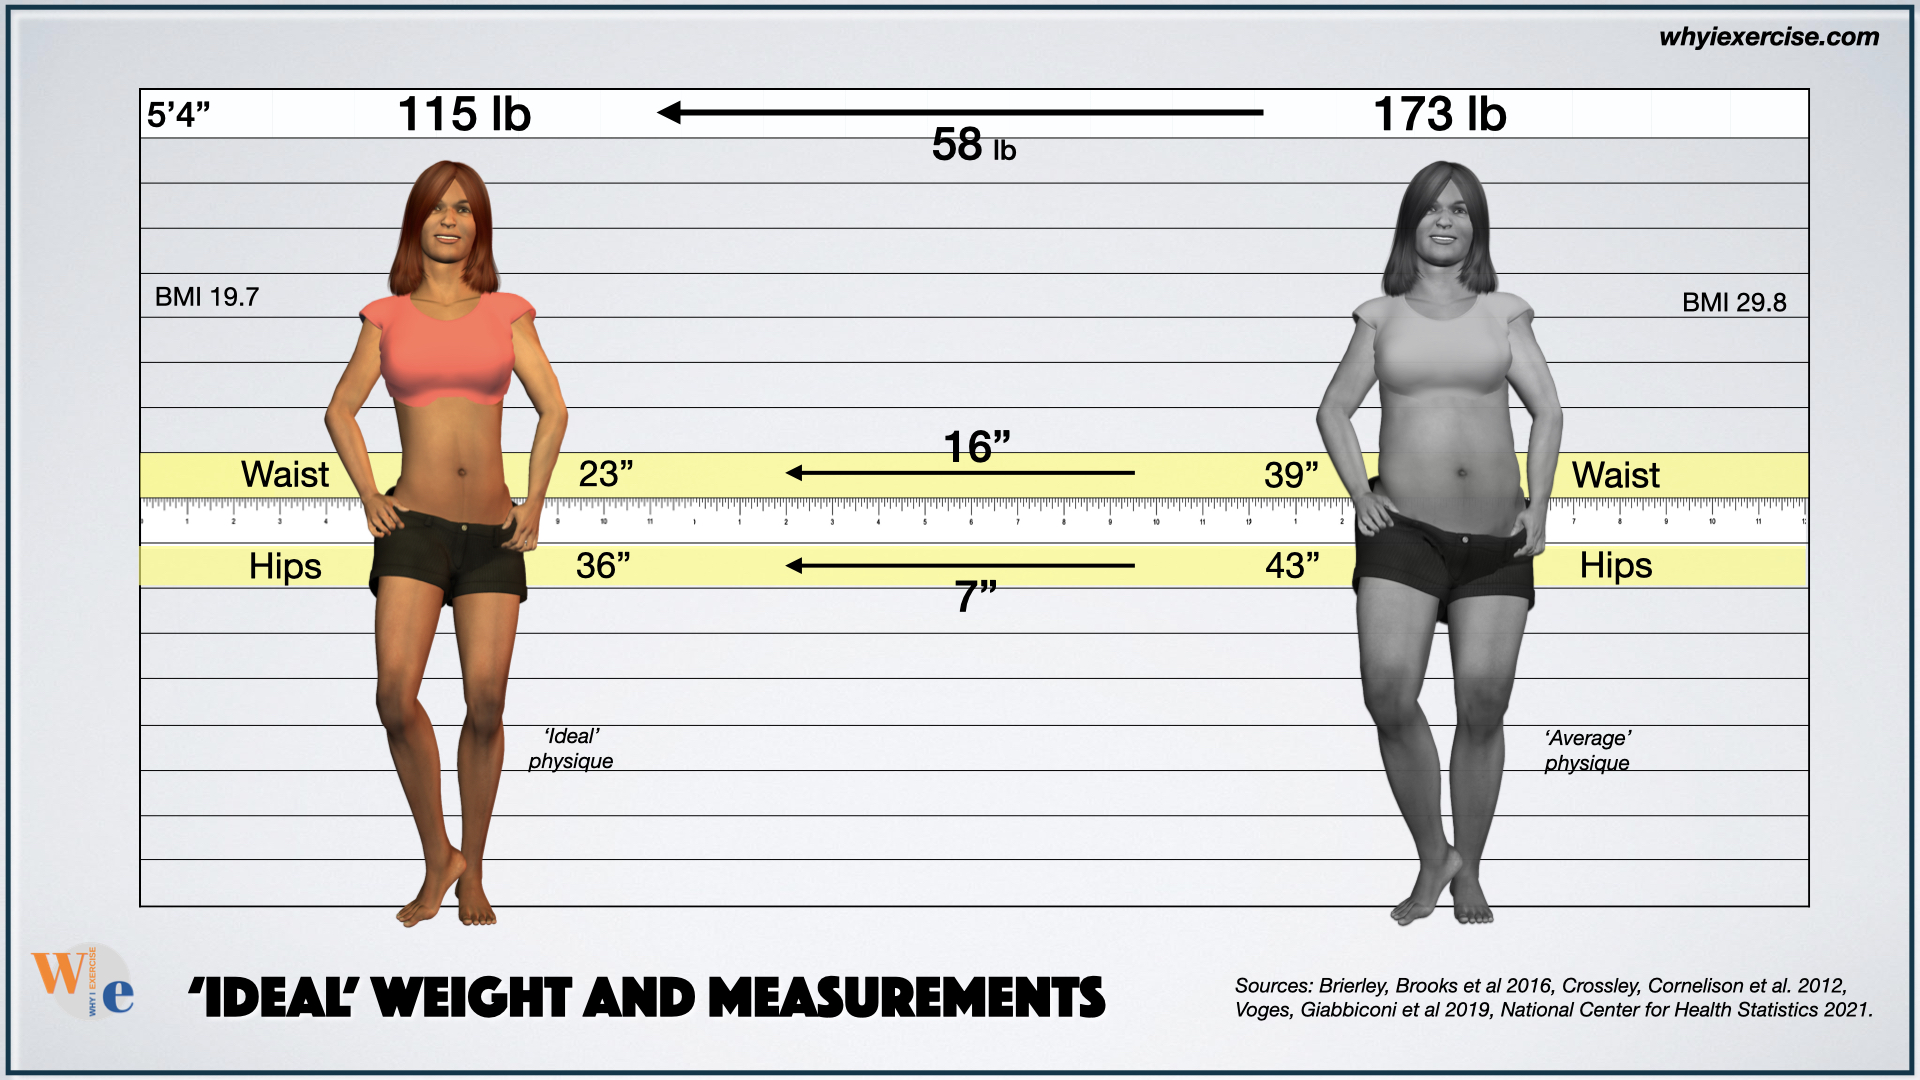 https://www.whyiexercise.com/images/ideal-weight-and-measurements-compared-to-average-woman.jpg